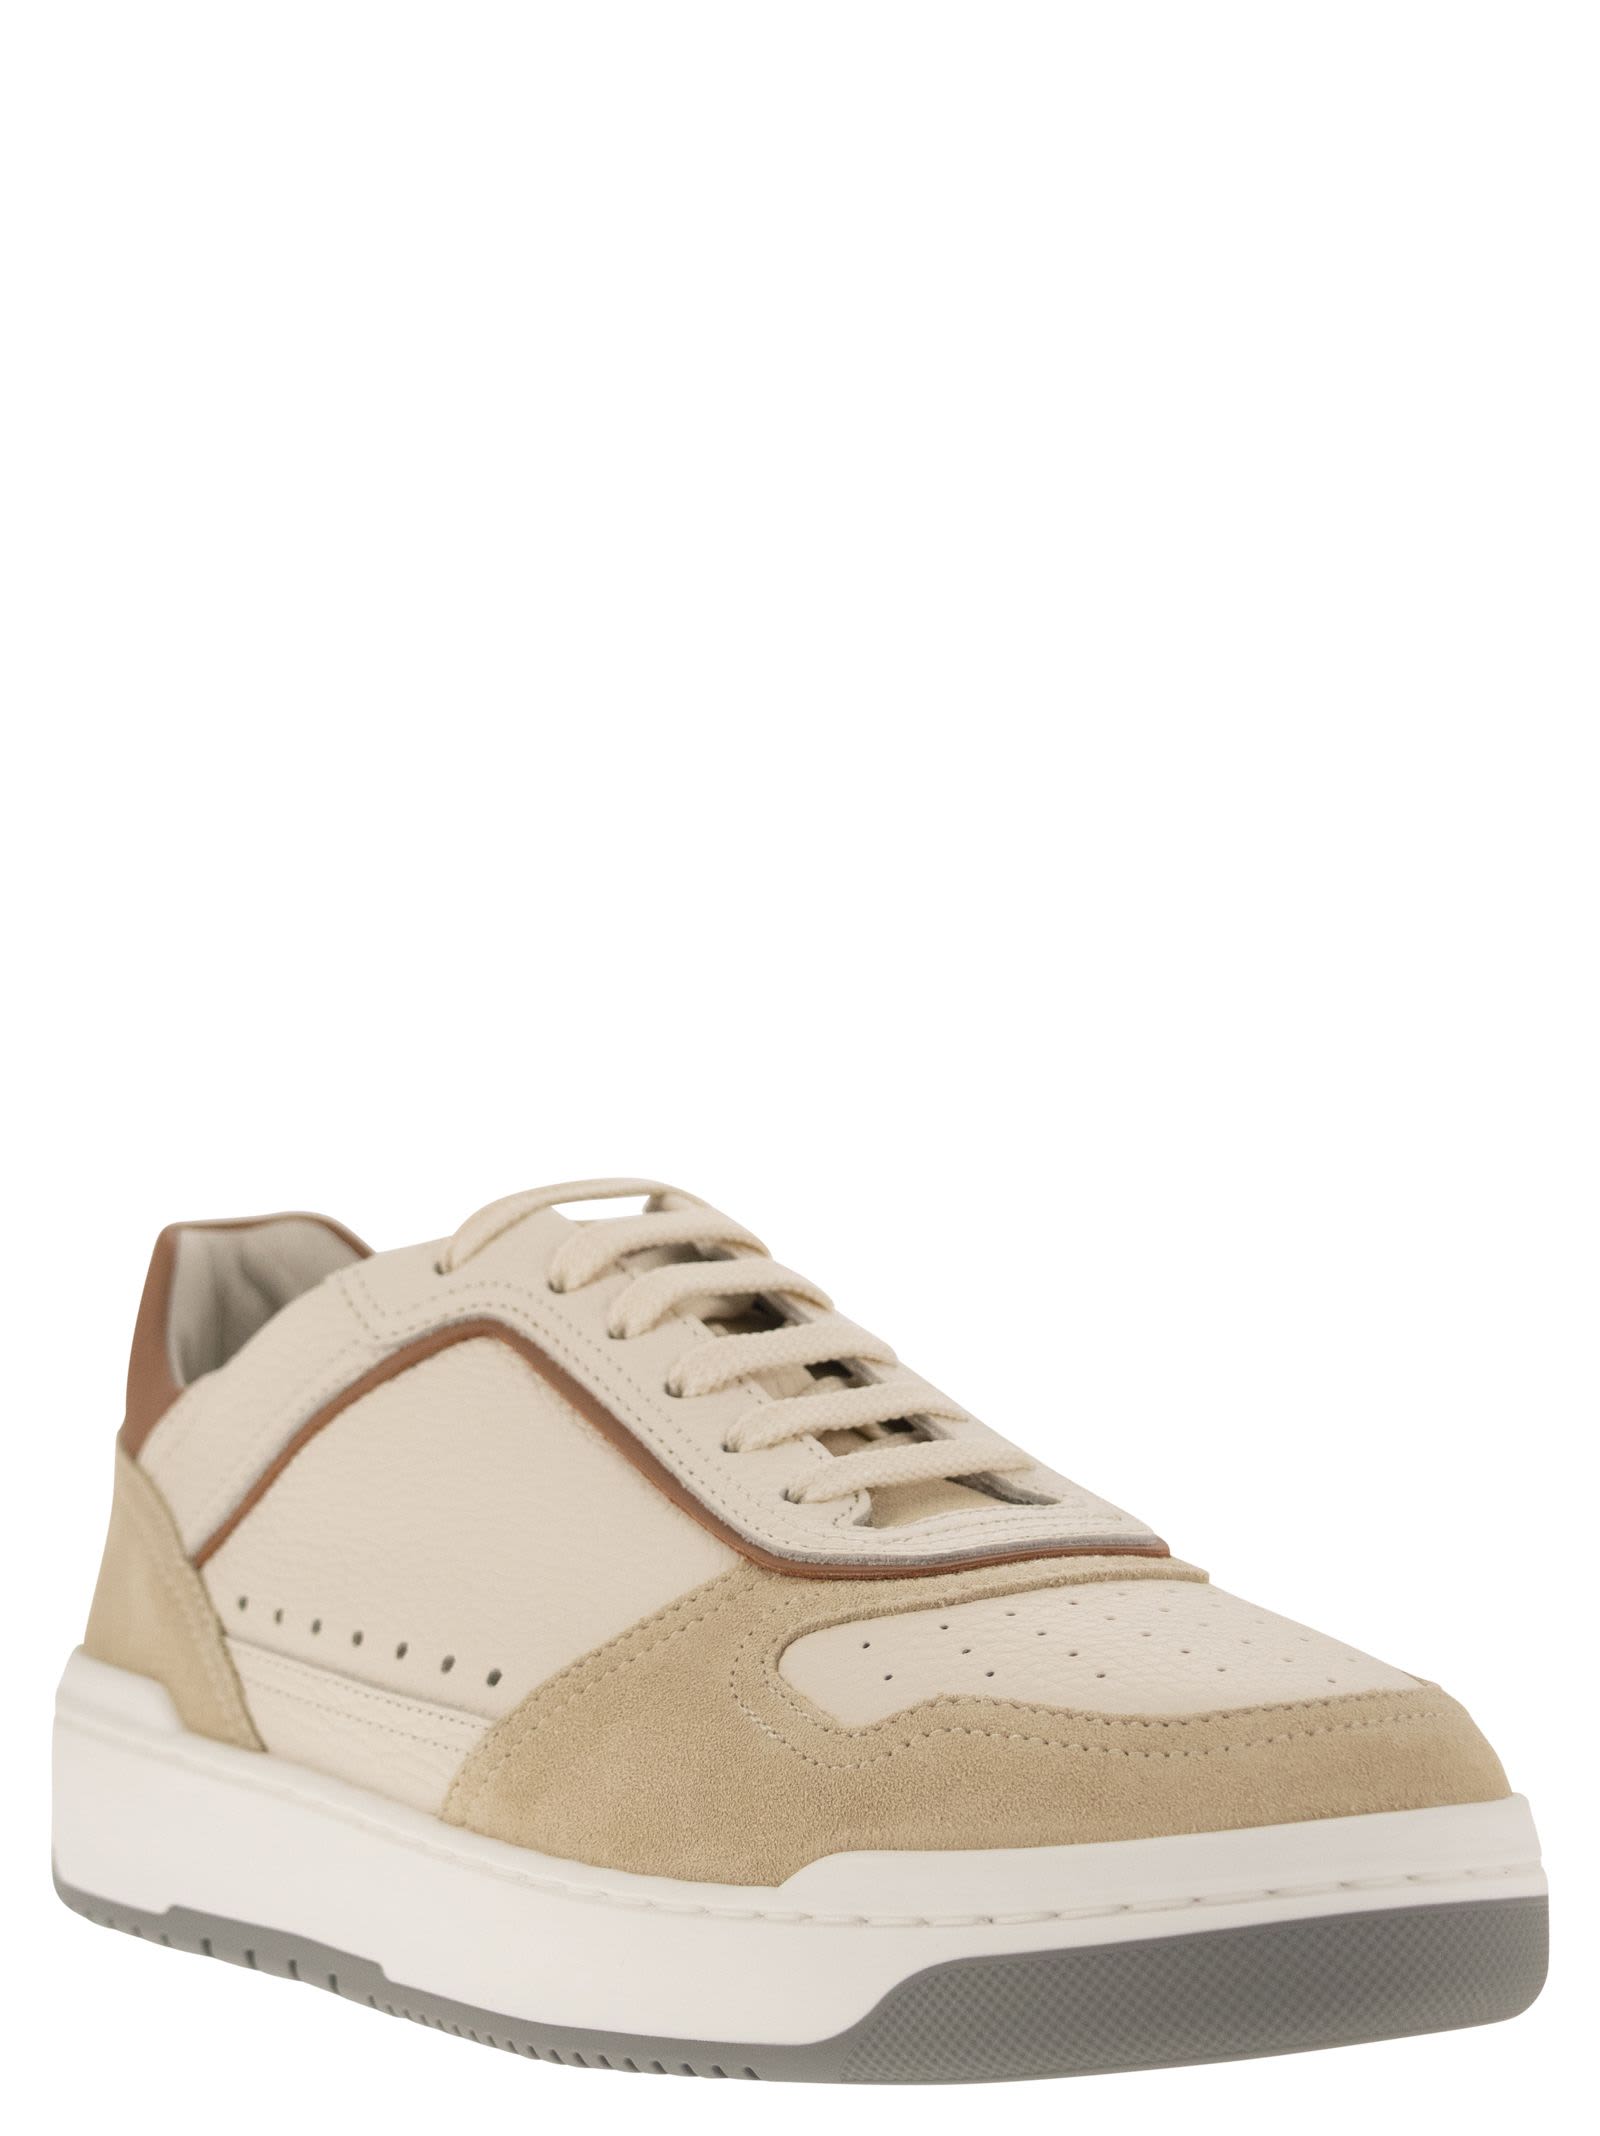 Shop Brunello Cucinelli Basket Trainers In Grained Calfskin And Washed Suede In Cream/beige